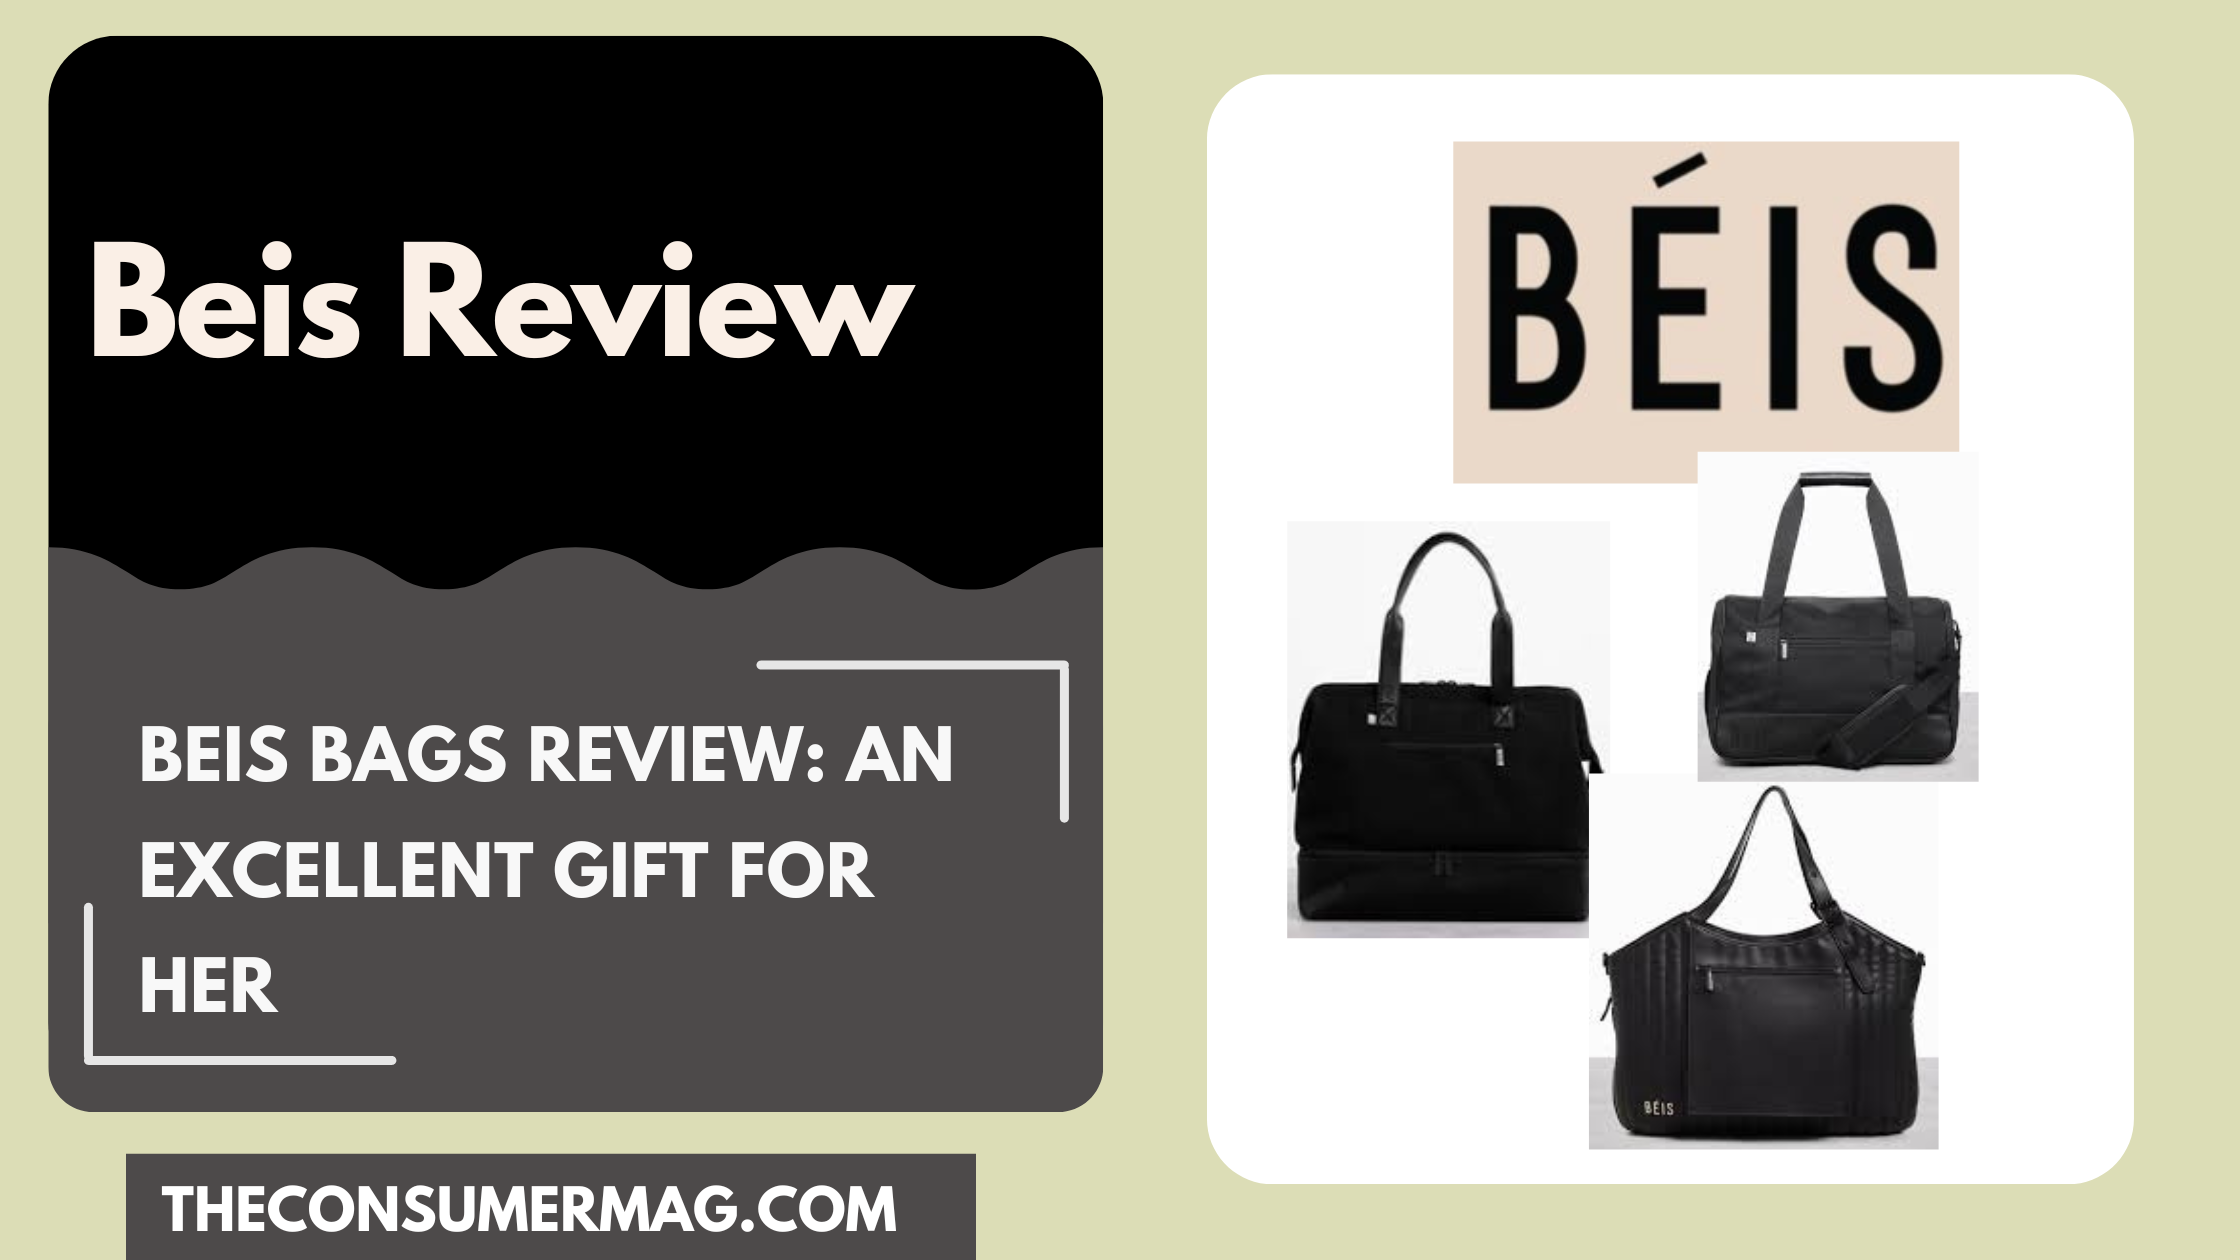 Beis Travel Bags featured image